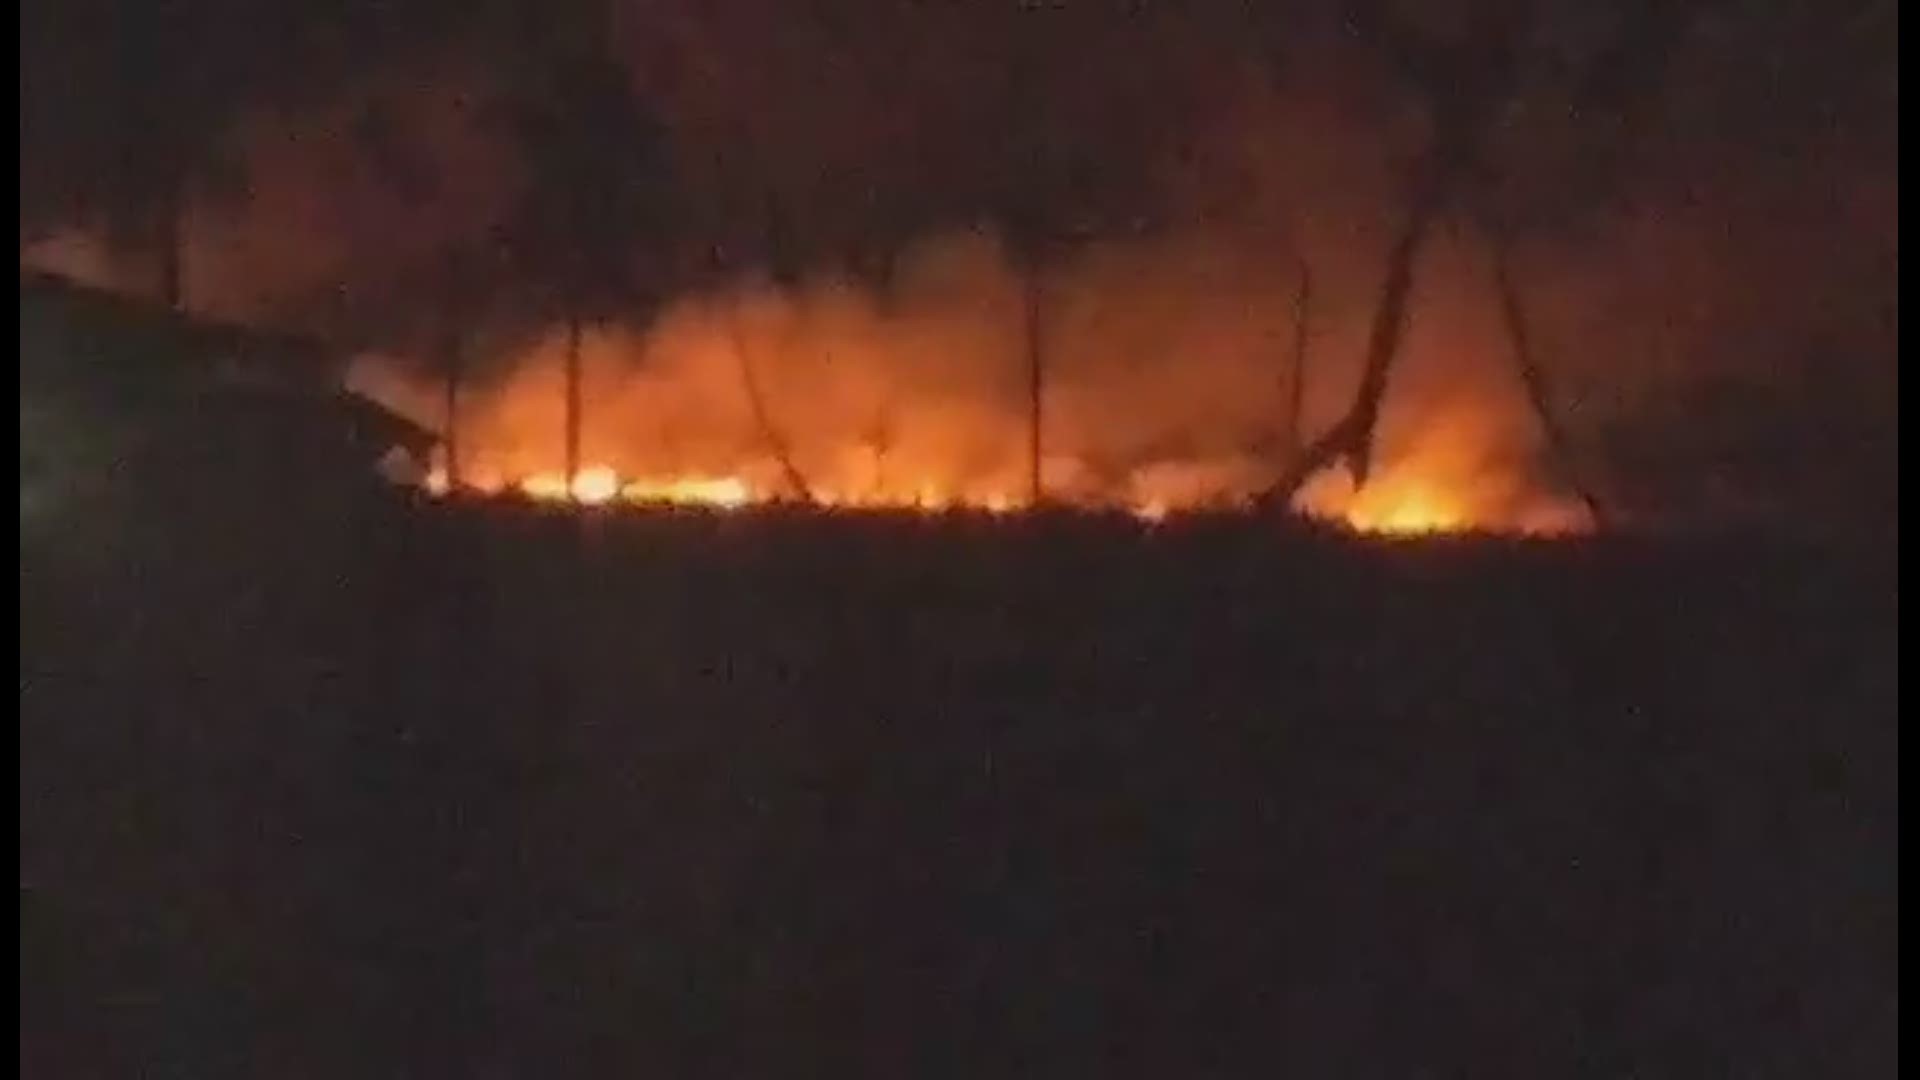 A large marsh fire on Bolivar Peninsula burned a small portion of the Bolivar Flats Shorebird Sanctuary. It's unclear if any wildlife were injured.